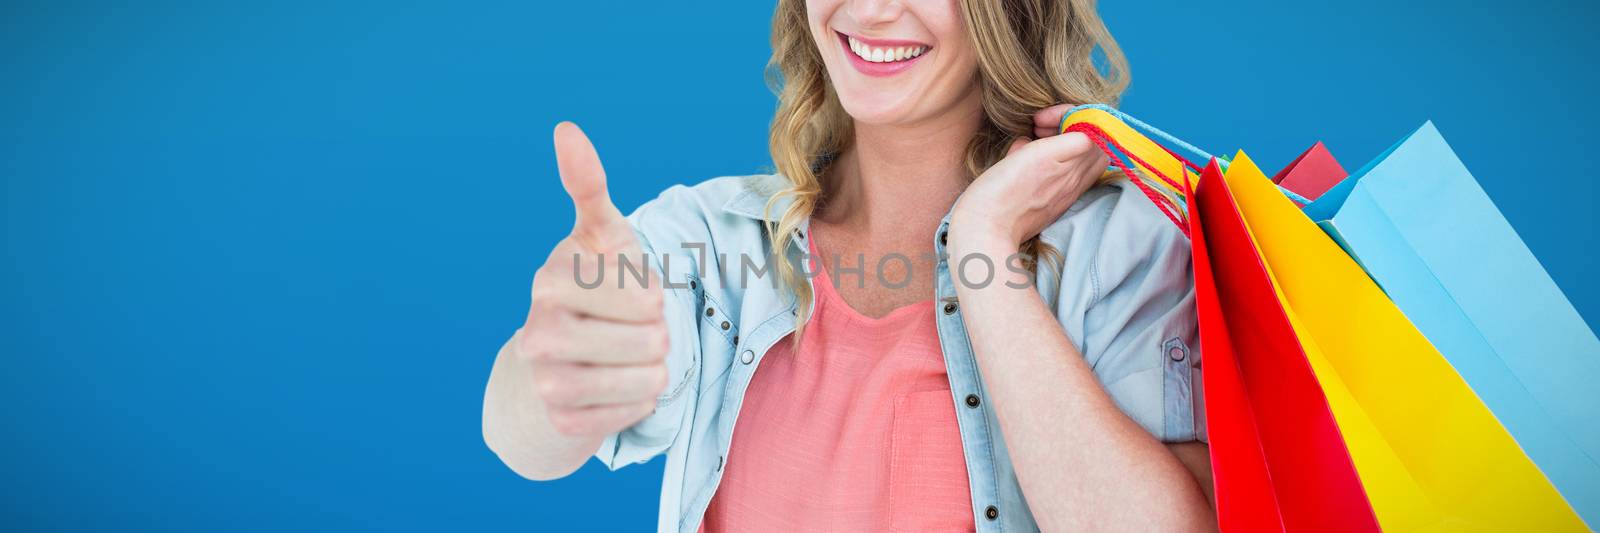 Woman holding some shopping bags against abstract blue background